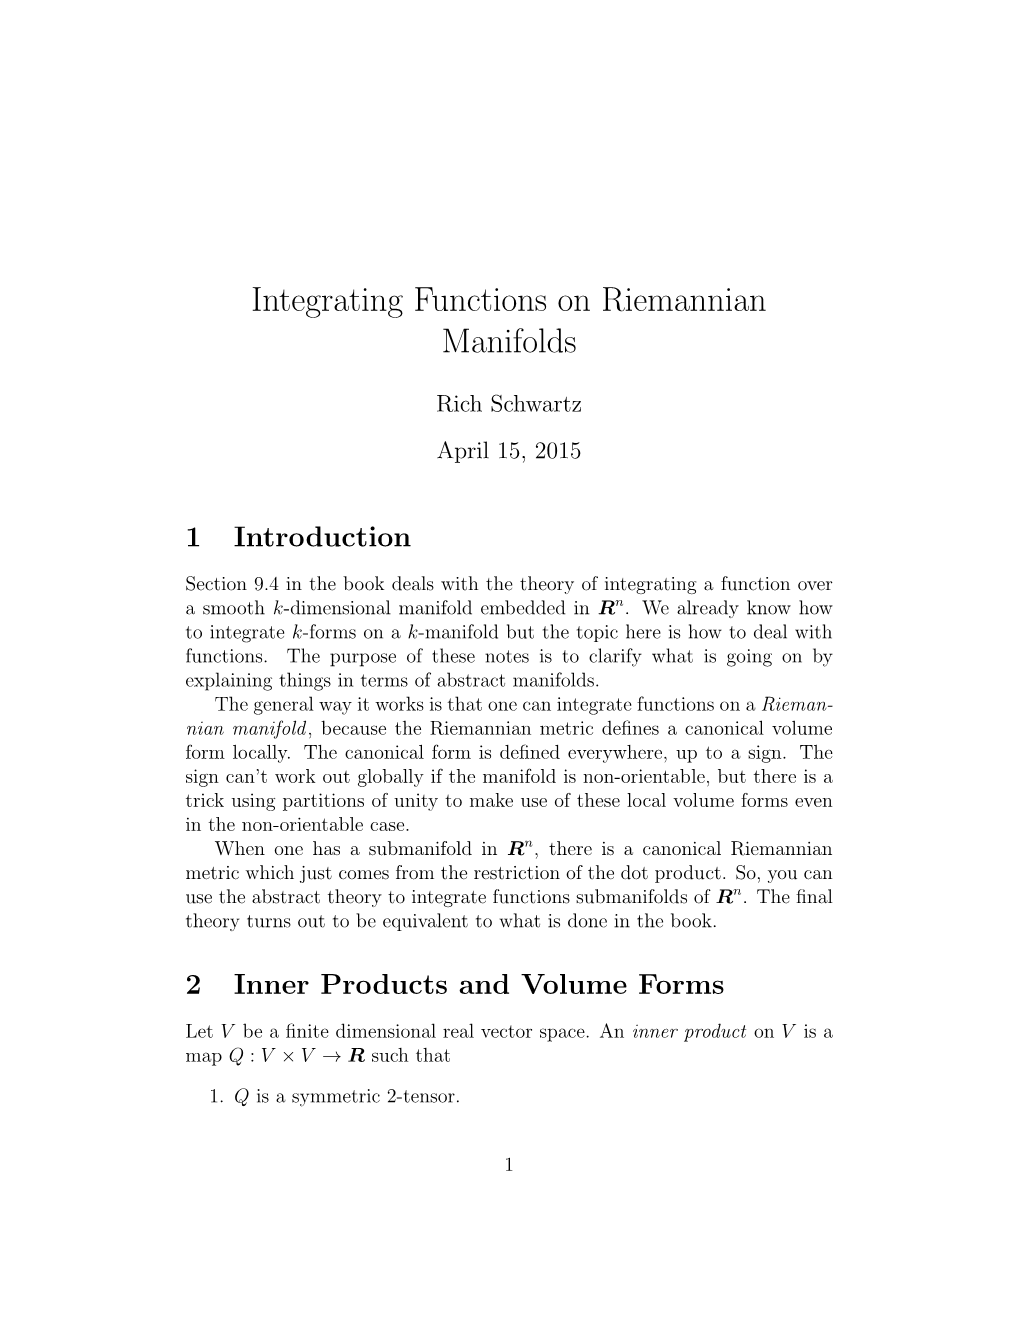 Integrating Functions on Riemannian Manifolds